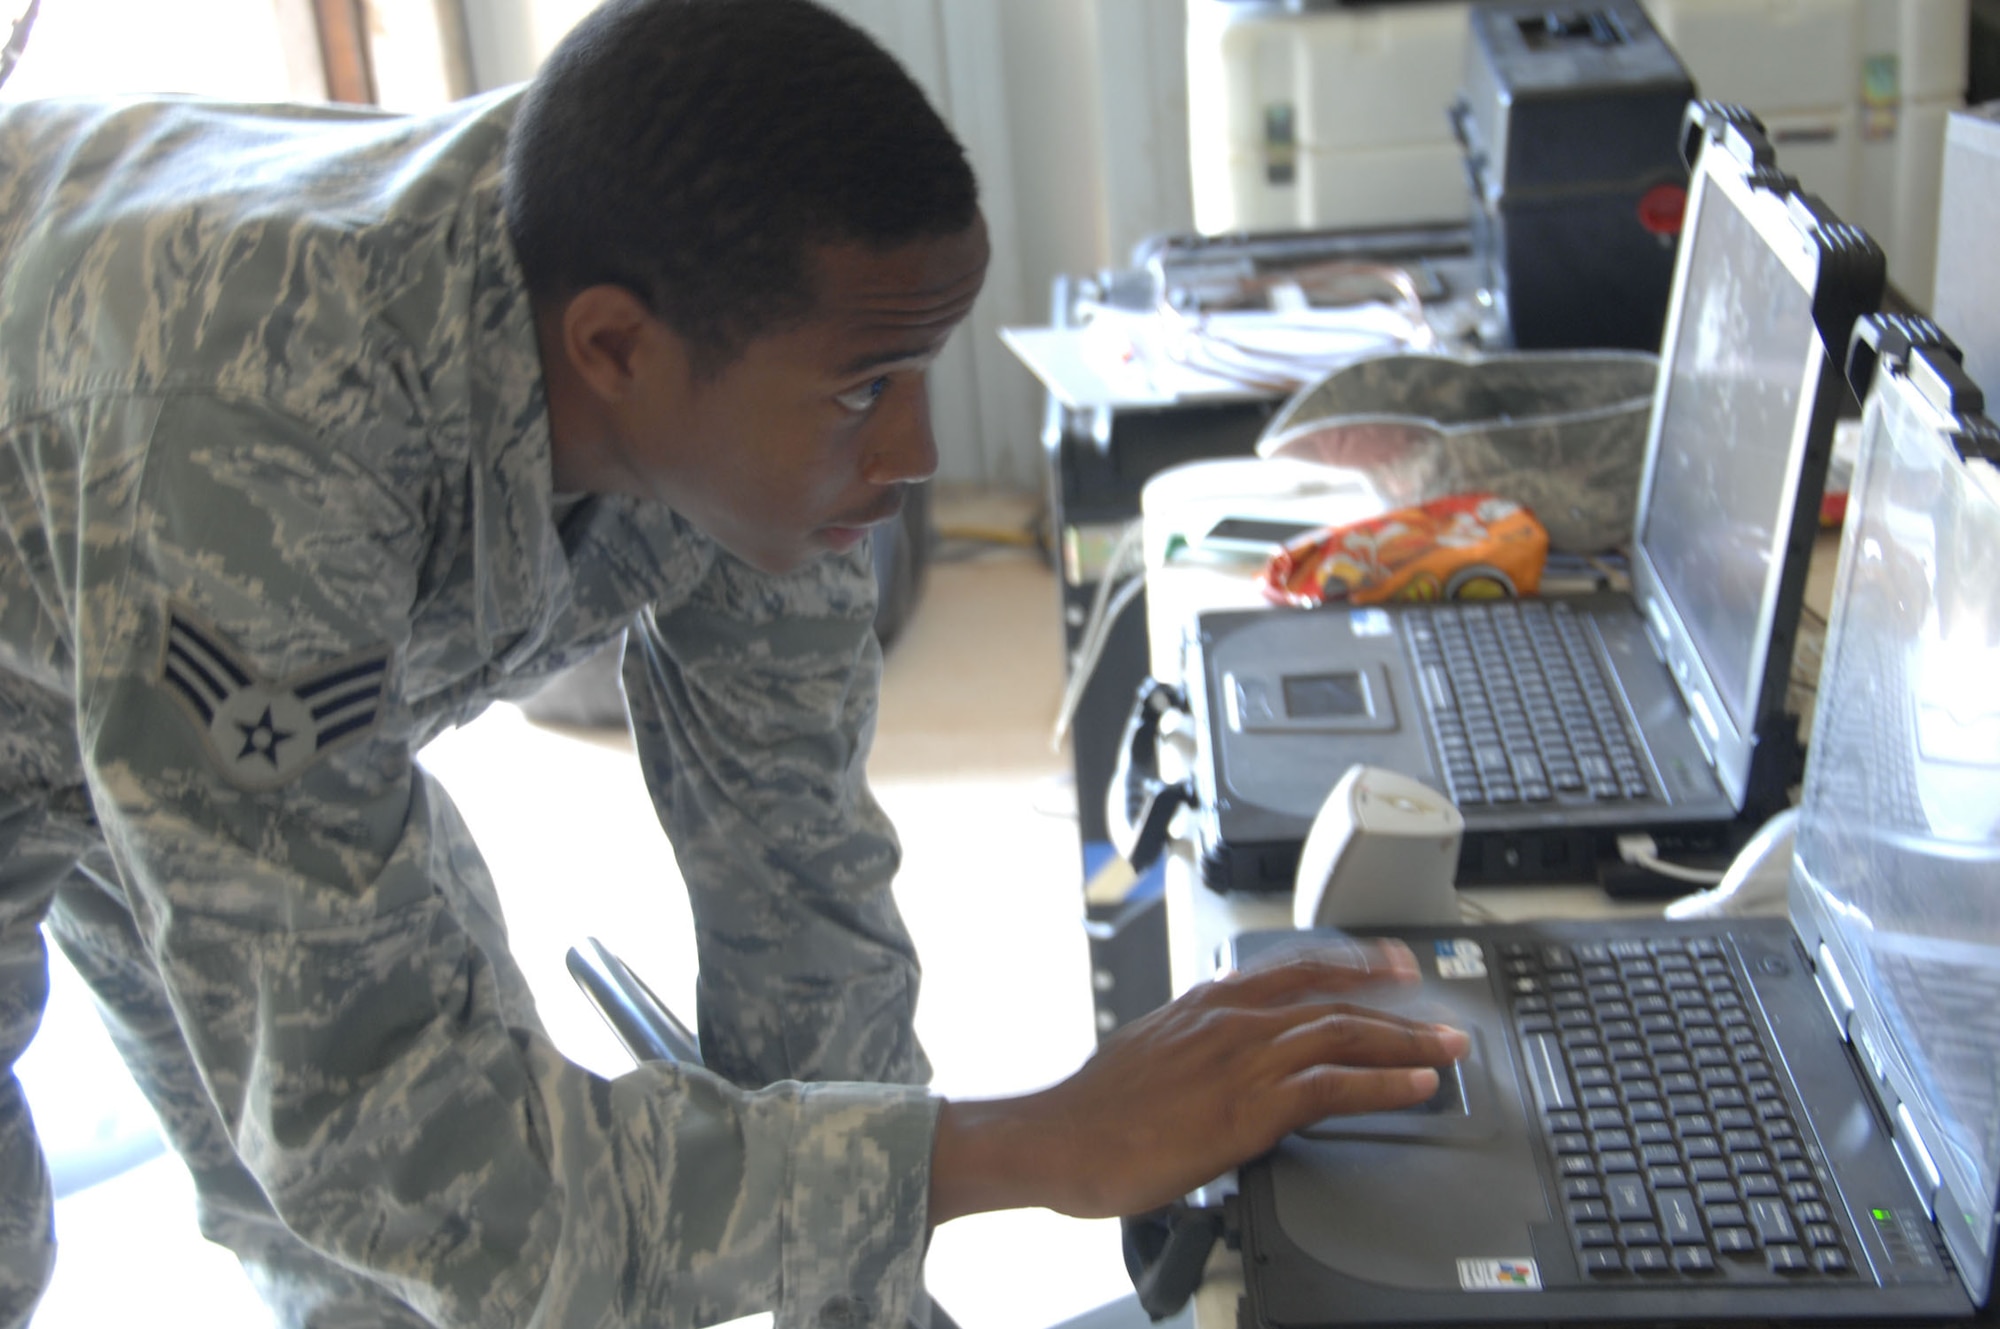 ANDERSEN AIR FORCE BASE, Guam - Senior Airman Marcus Prentiss, 644th Combat Communications Squadron cyber transport systems and voice systems technician, uses a laptop computer to upgrade software on a secure telephone console here June 23. Airman Prentiss was selected by Master Sgt. Shawn Bendixson, 644th CBCS first sergeant, for his can-do attitude and professionalism. (U.S. Air Force photo by Senior Airman Shane Dunaway)  